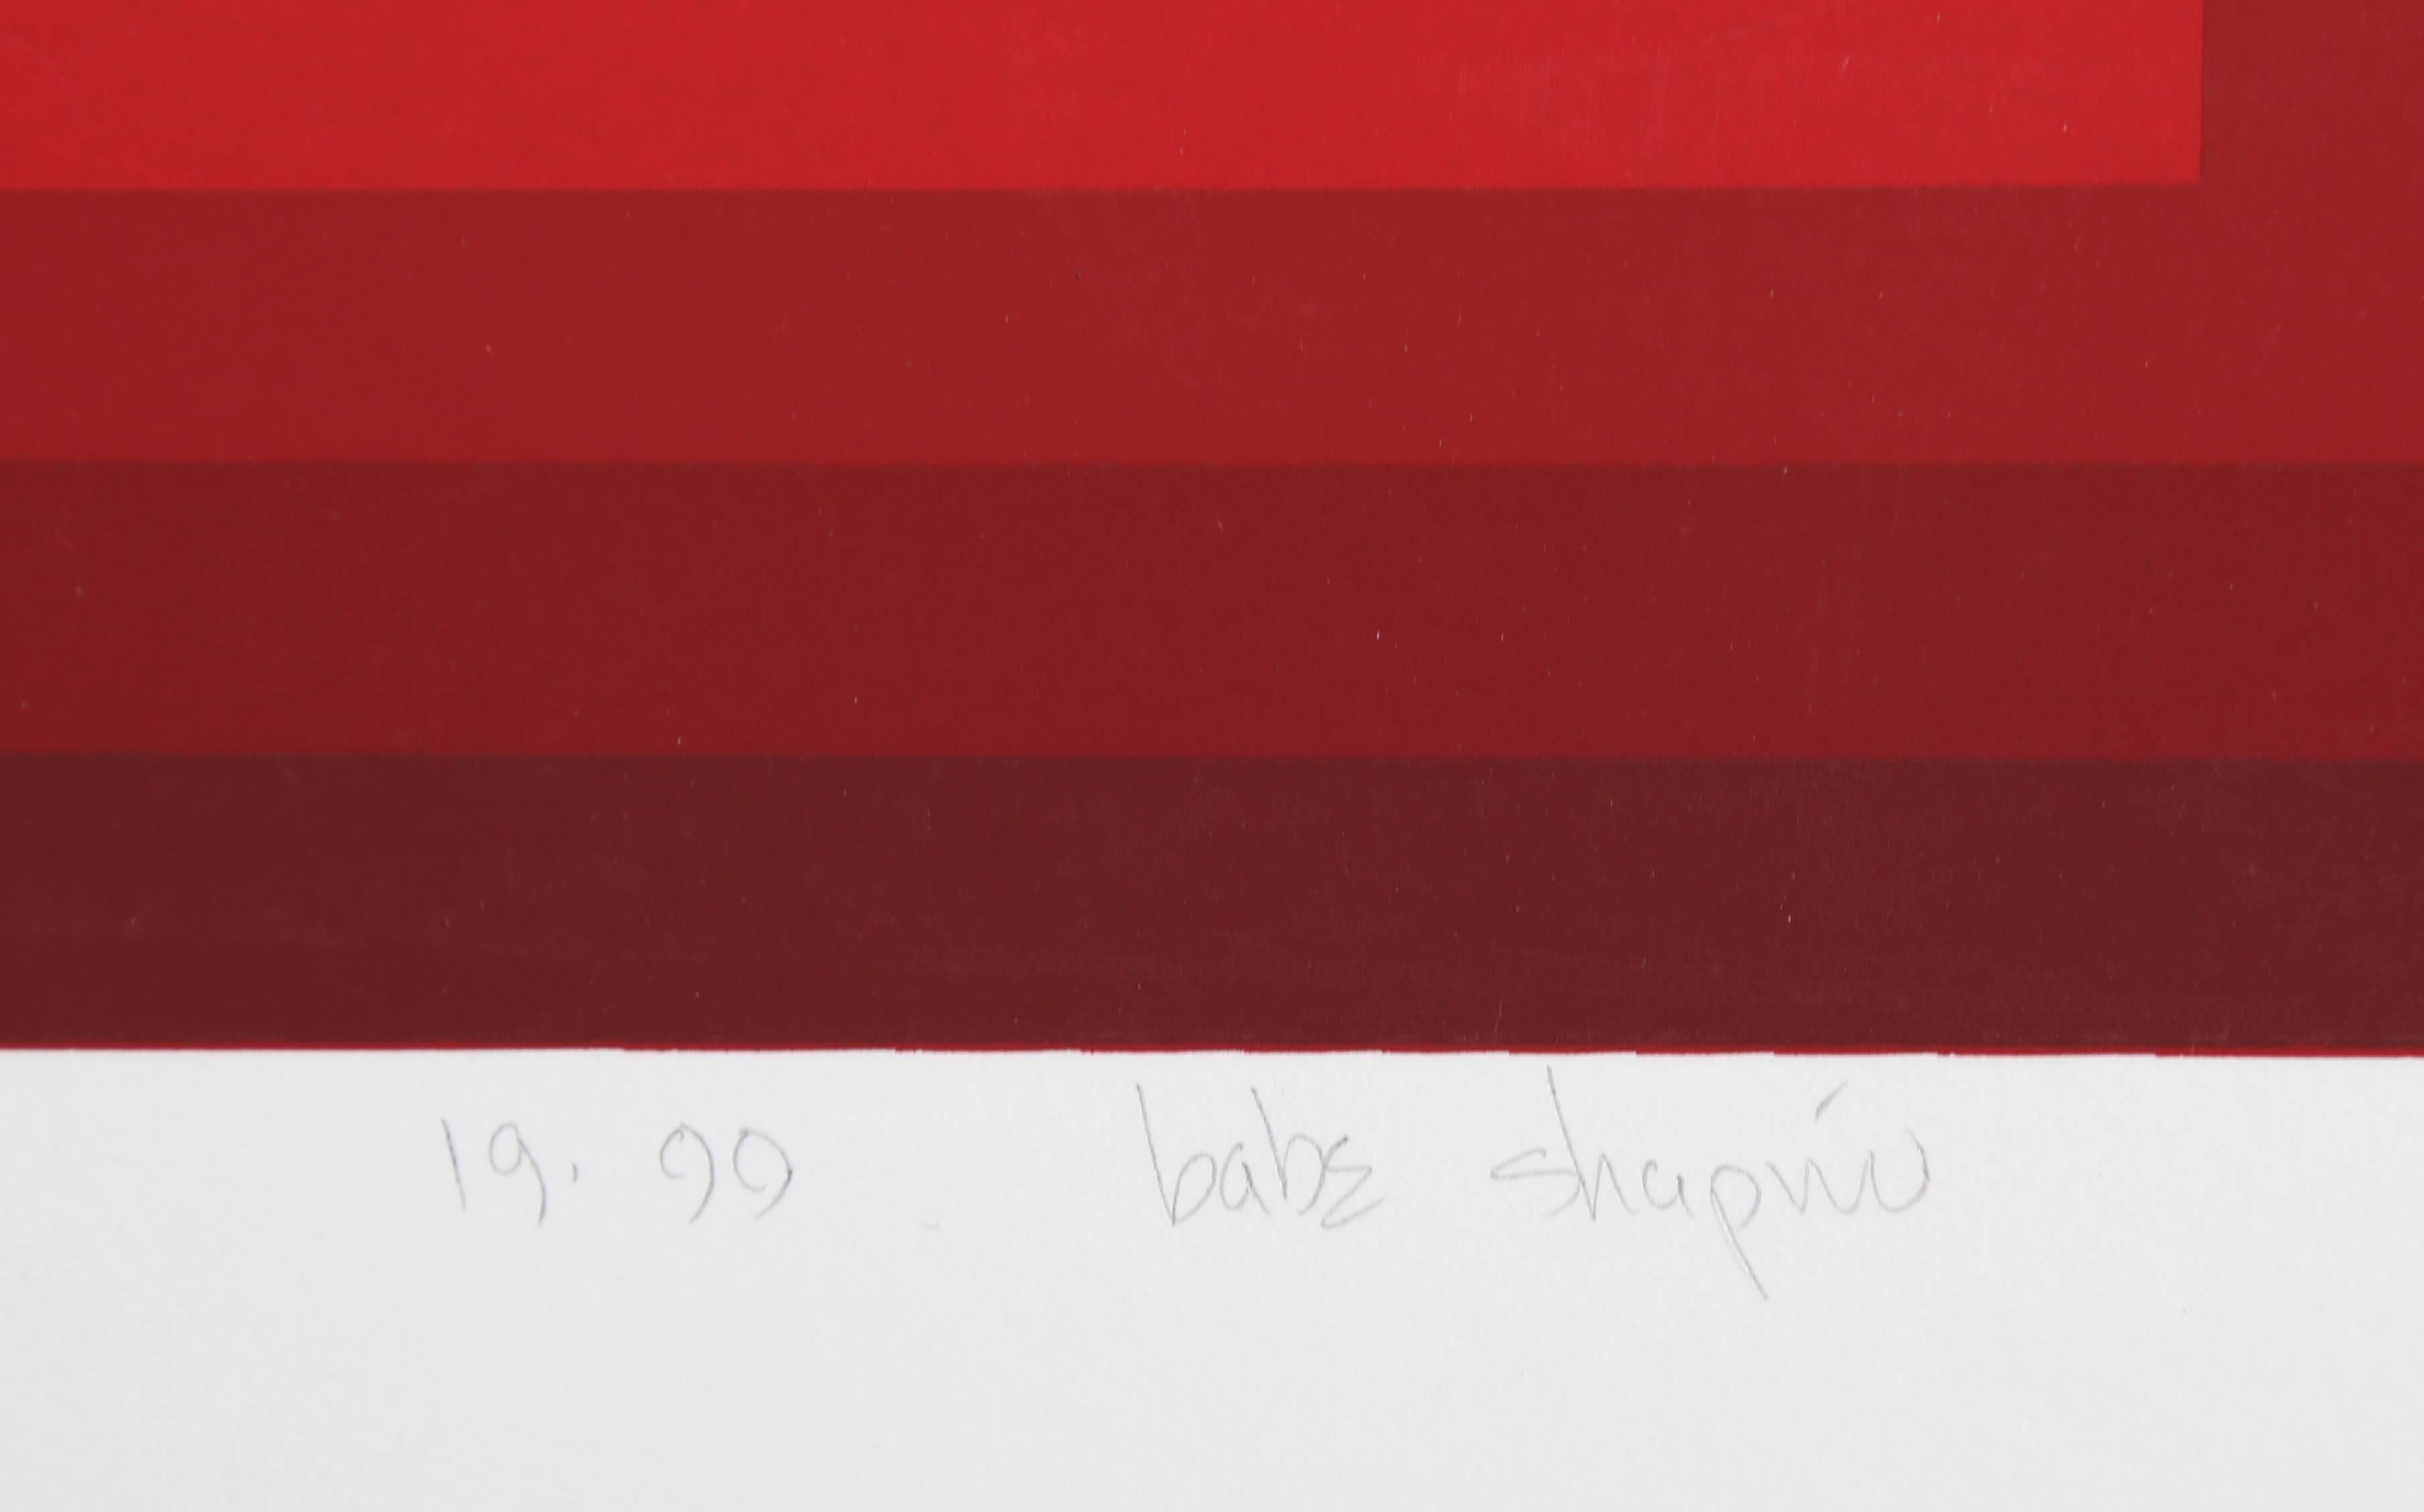 Artist: Babe Shapiro, American (1937 - 2016)
Title: Red v. 2
Year: 1972
Medium: Silkscreen, signed and numbered in pencil
Edition: 99
Image Size: 25 x 25 inches
Size: 35 x 35 in. (88.9 x 88.9 cm)